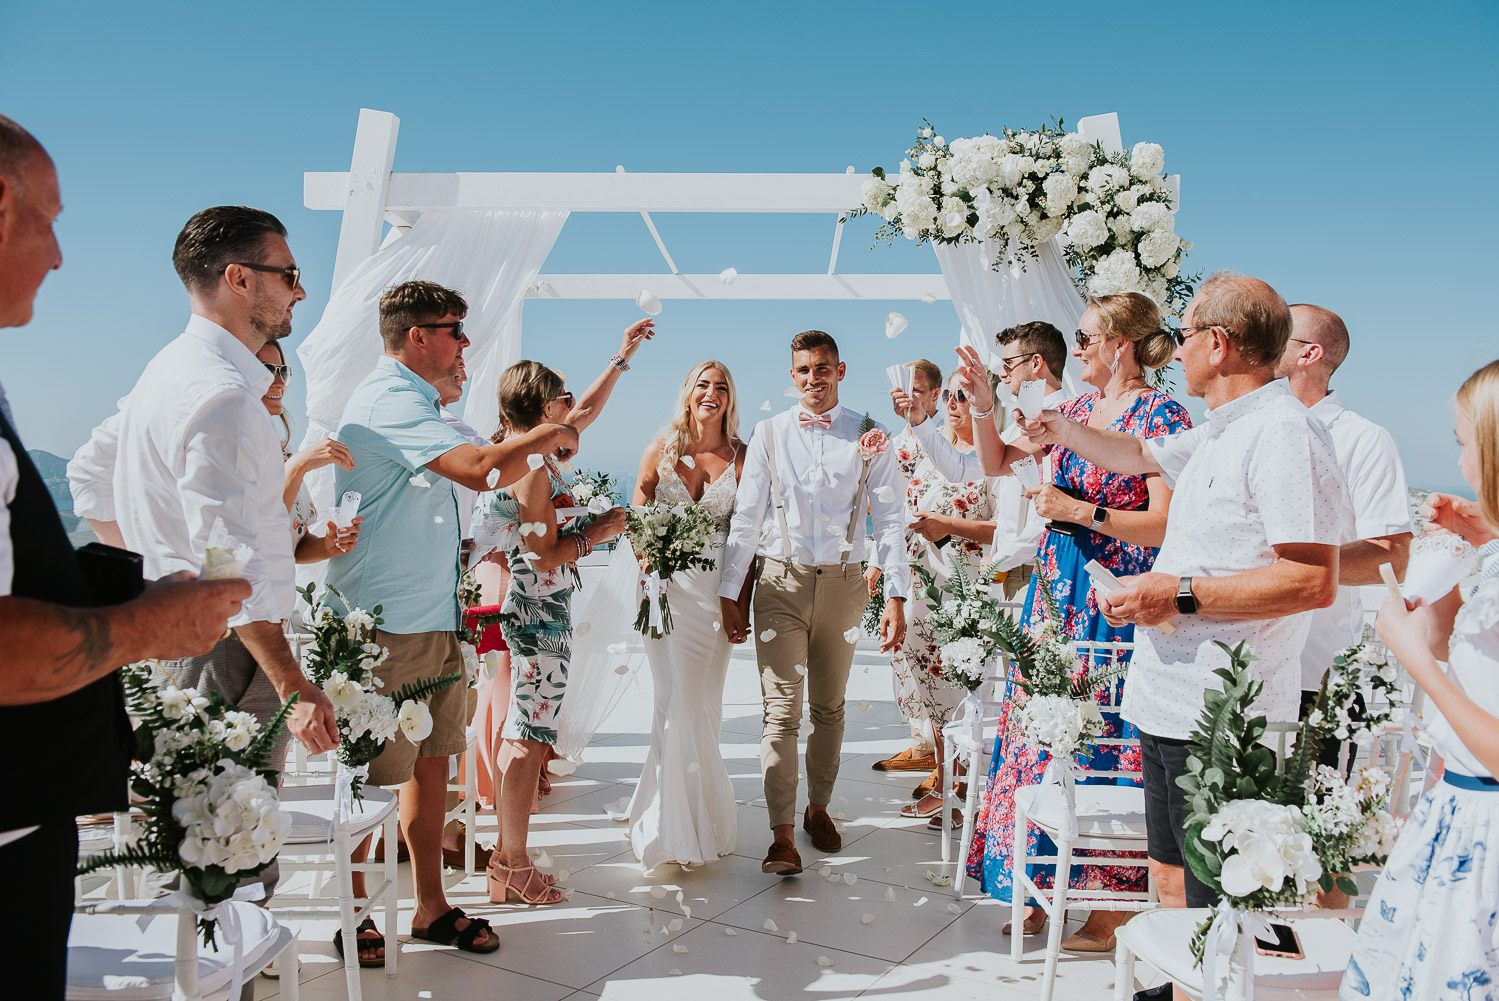 Wedding photographer Santorini: bride and groom laughing walking down the aisle showered in rose petals by Ben and Vesna.